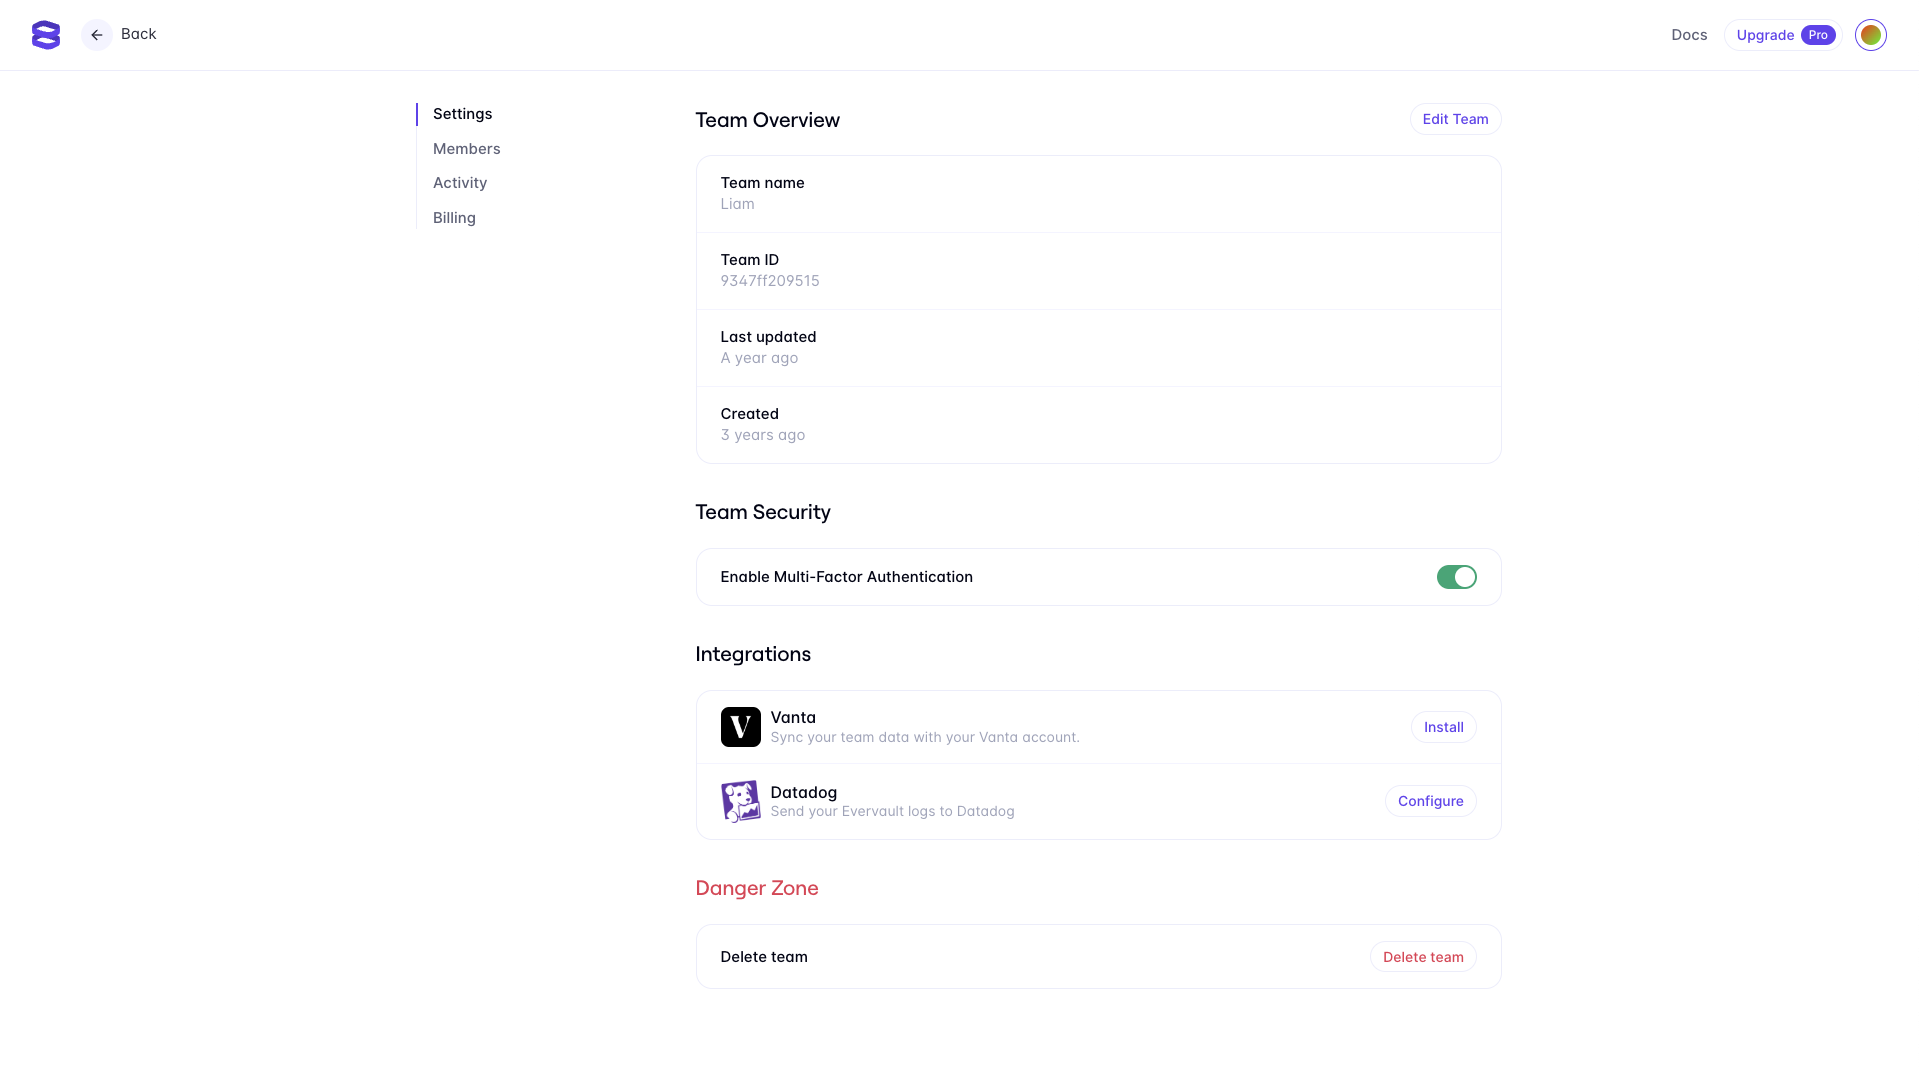 Datadog available on the integrations page